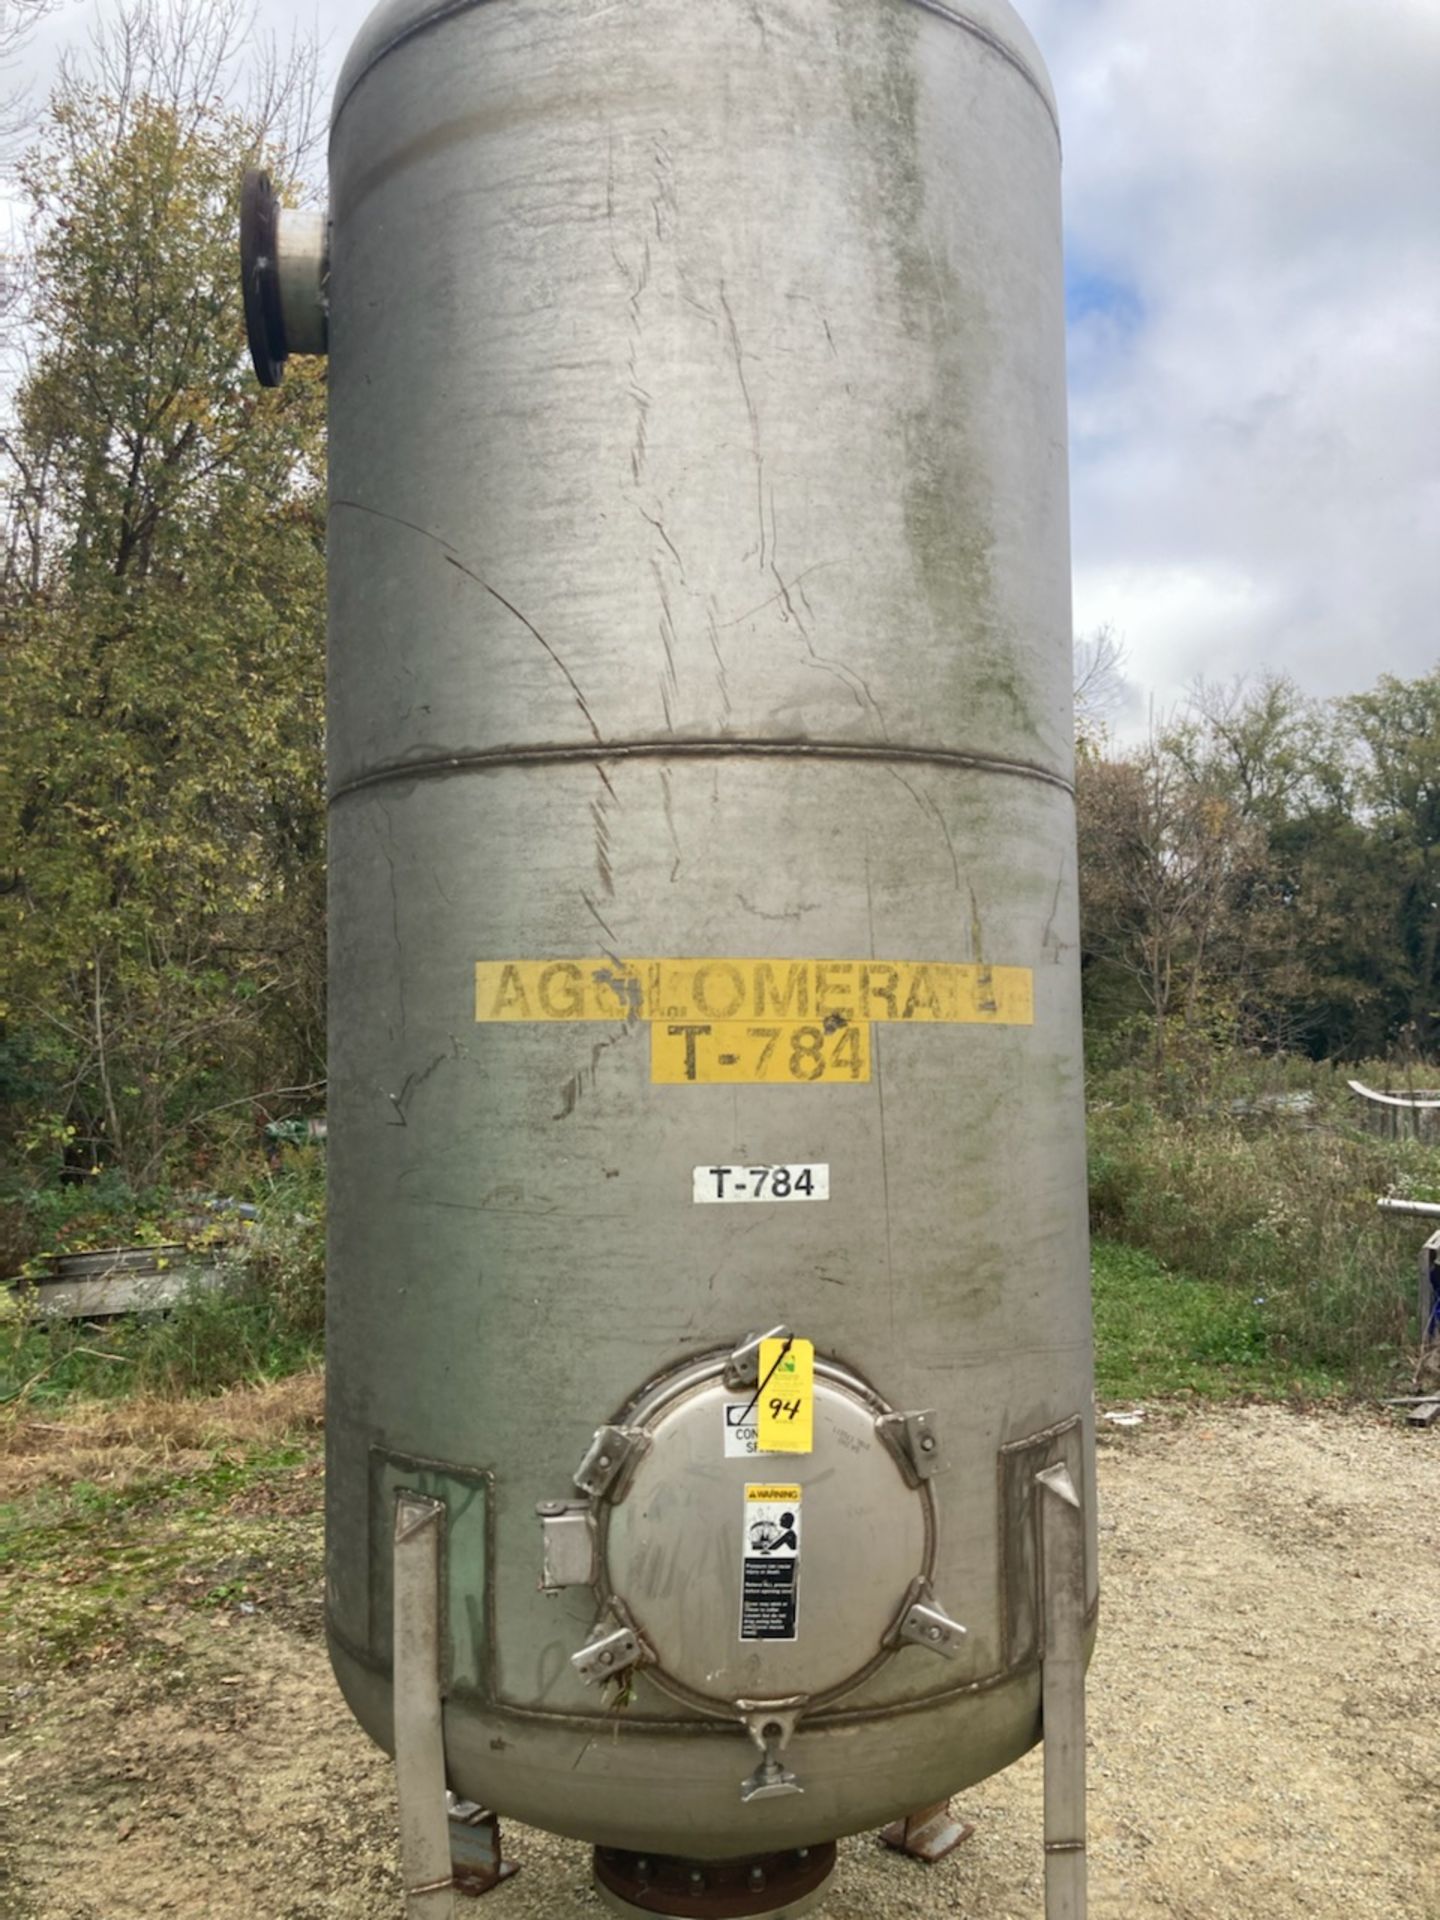 Stainless Steel Tank with Manway - Approximate 825 Gallons. RIGGING/LOADING FEE $150